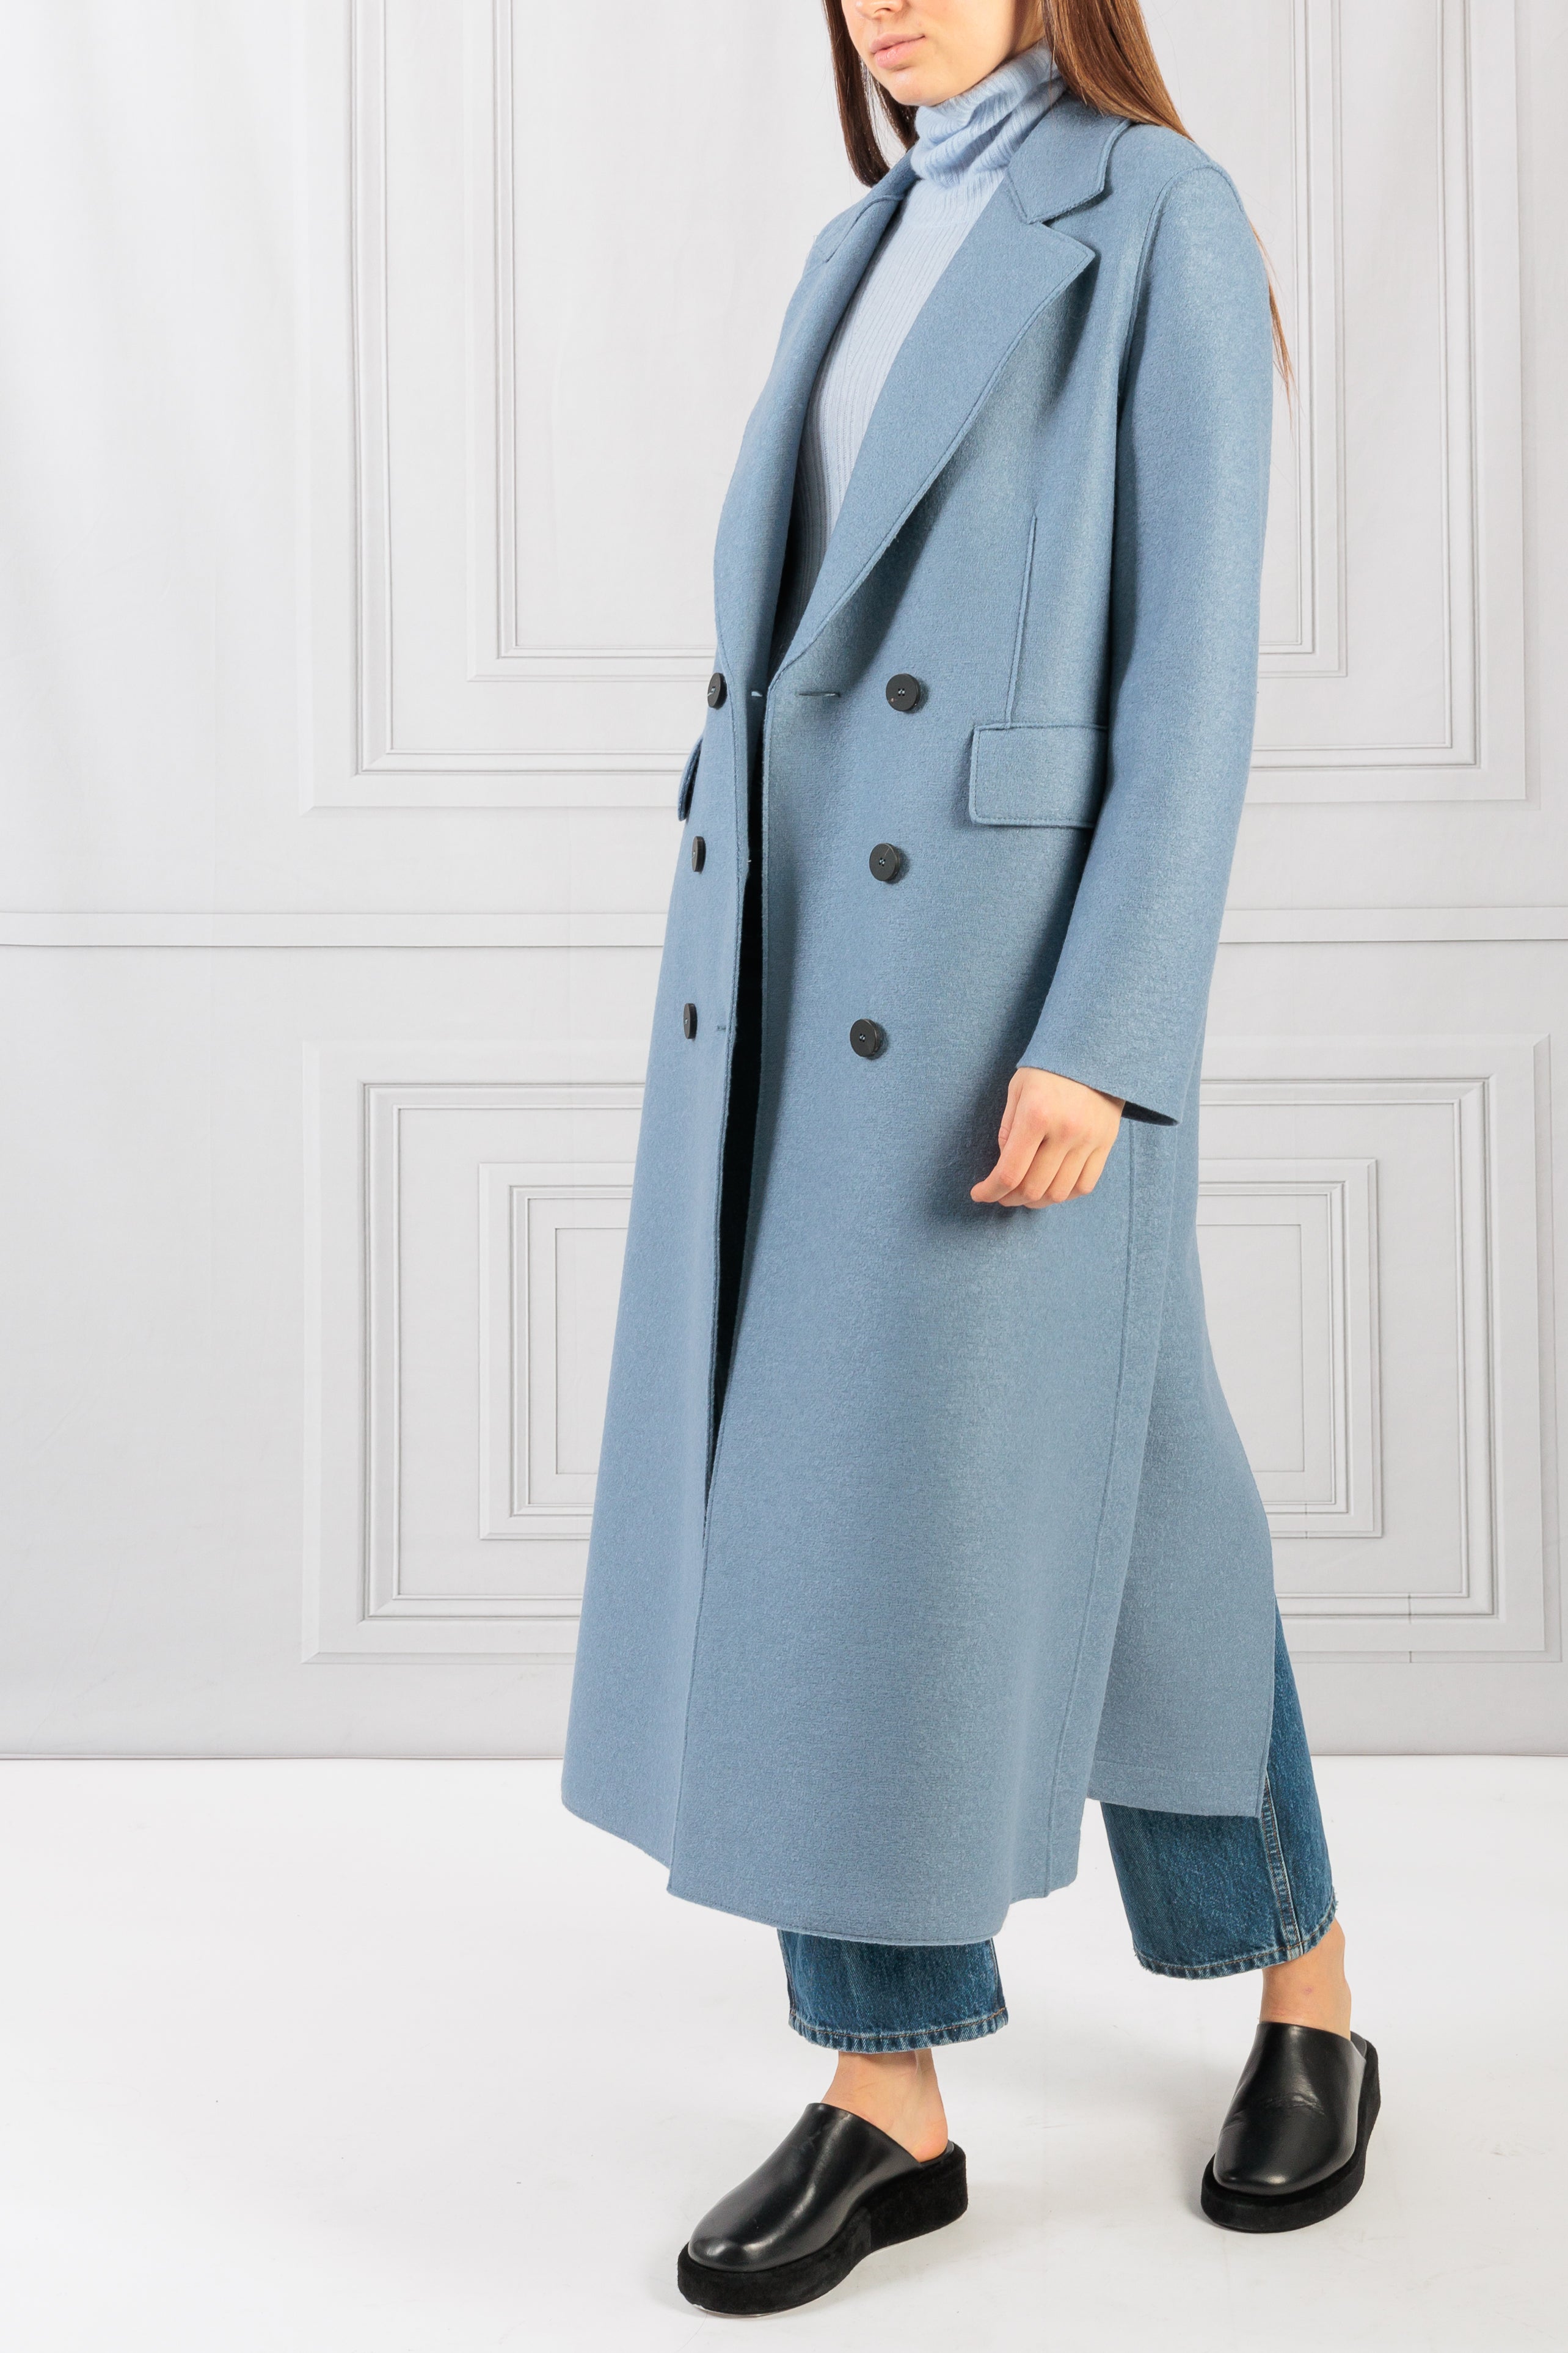 Victoria Beckham Double-Breasted Tailored Coat